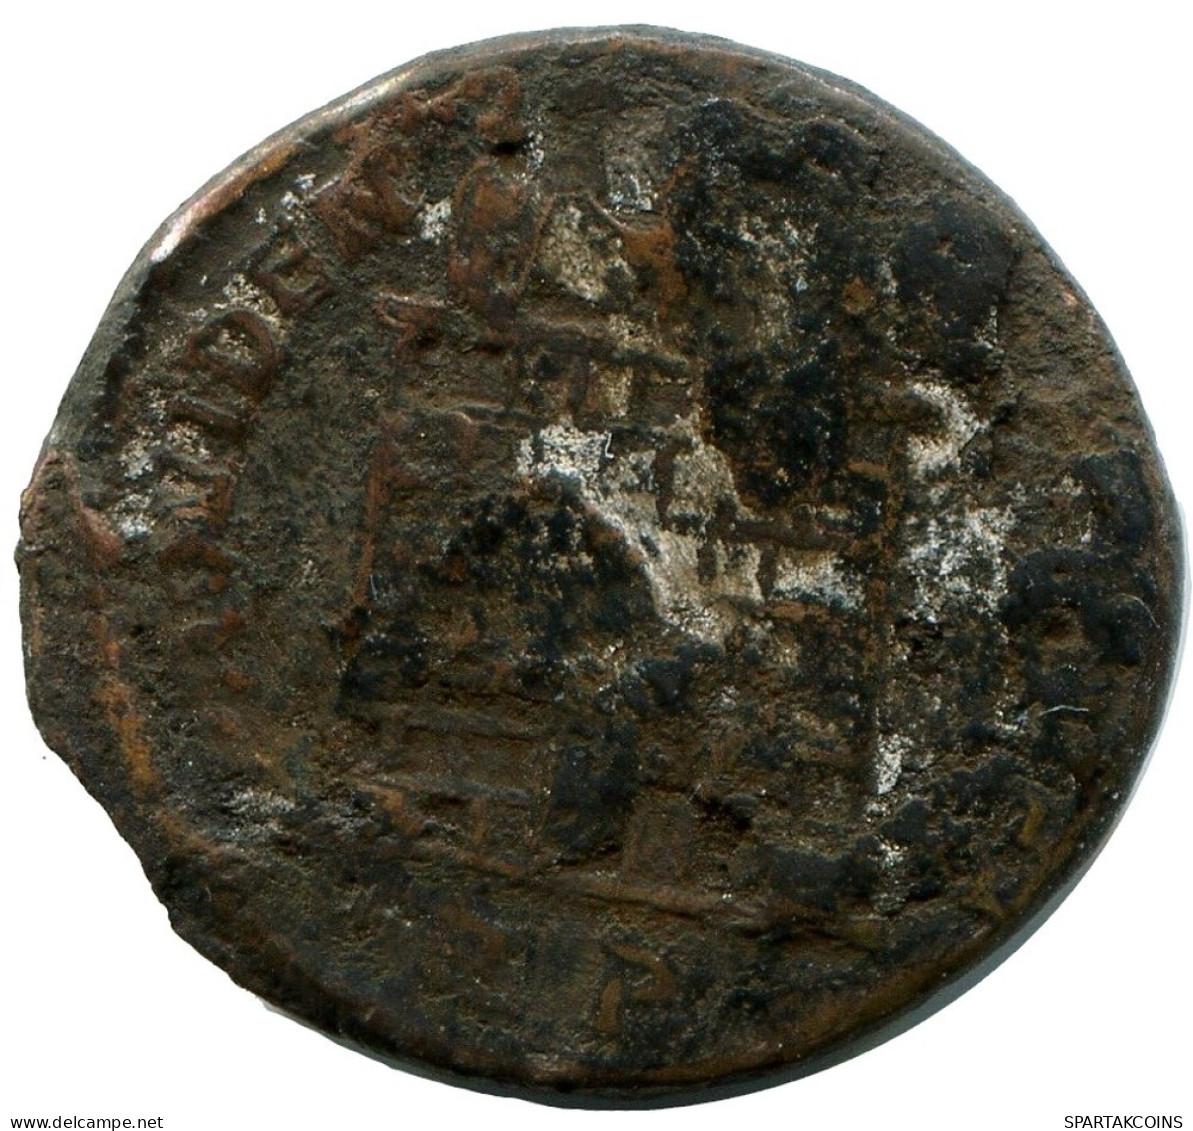 CONSTANTINE I MINTED IN ROME ITALY FOUND IN IHNASYAH HOARD EGYPT #ANC11156.14.E.A - L'Empire Chrétien (307 à 363)